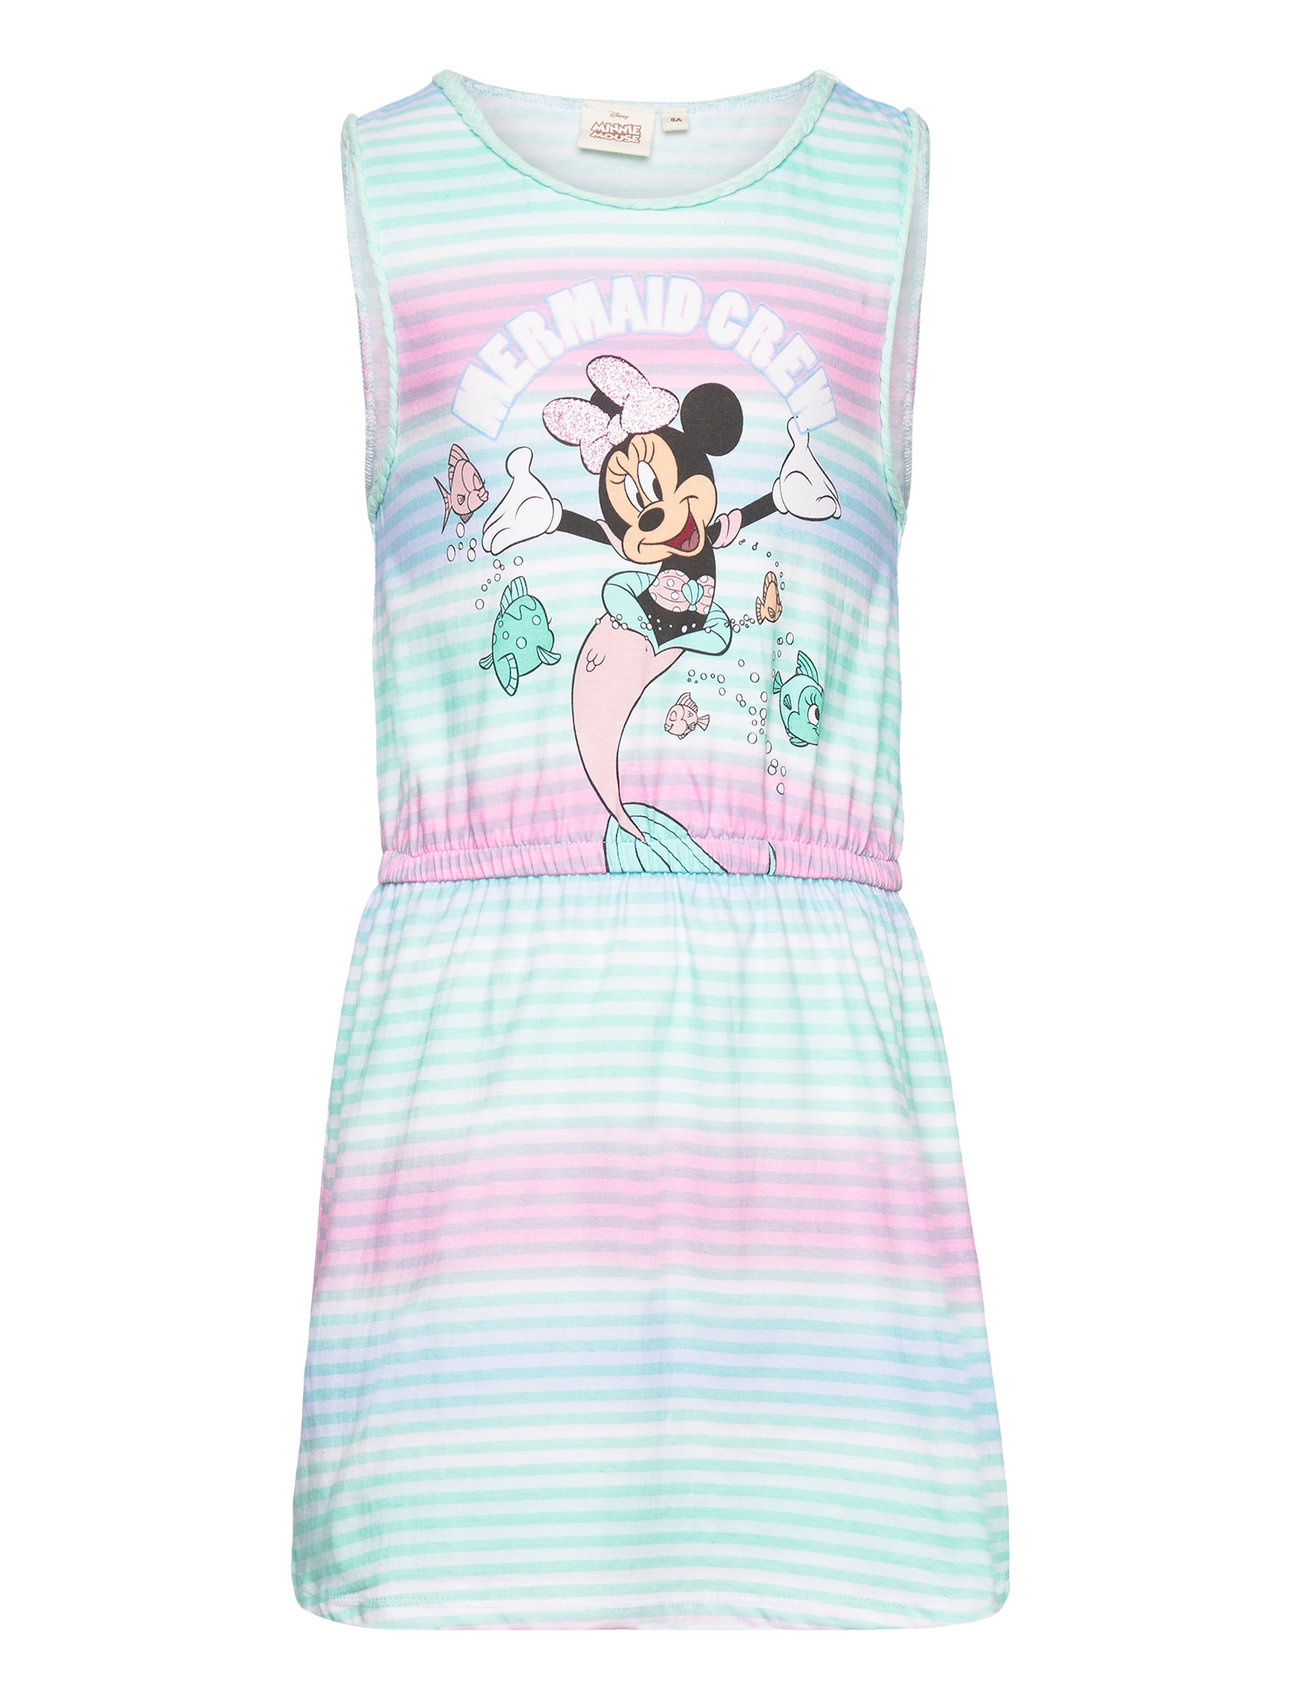 Dress Without Sleeve Dresses & Skirts Dresses Casual Dresses Short-sleeved Casual Dresses Multi/patterned Minnie Mouse